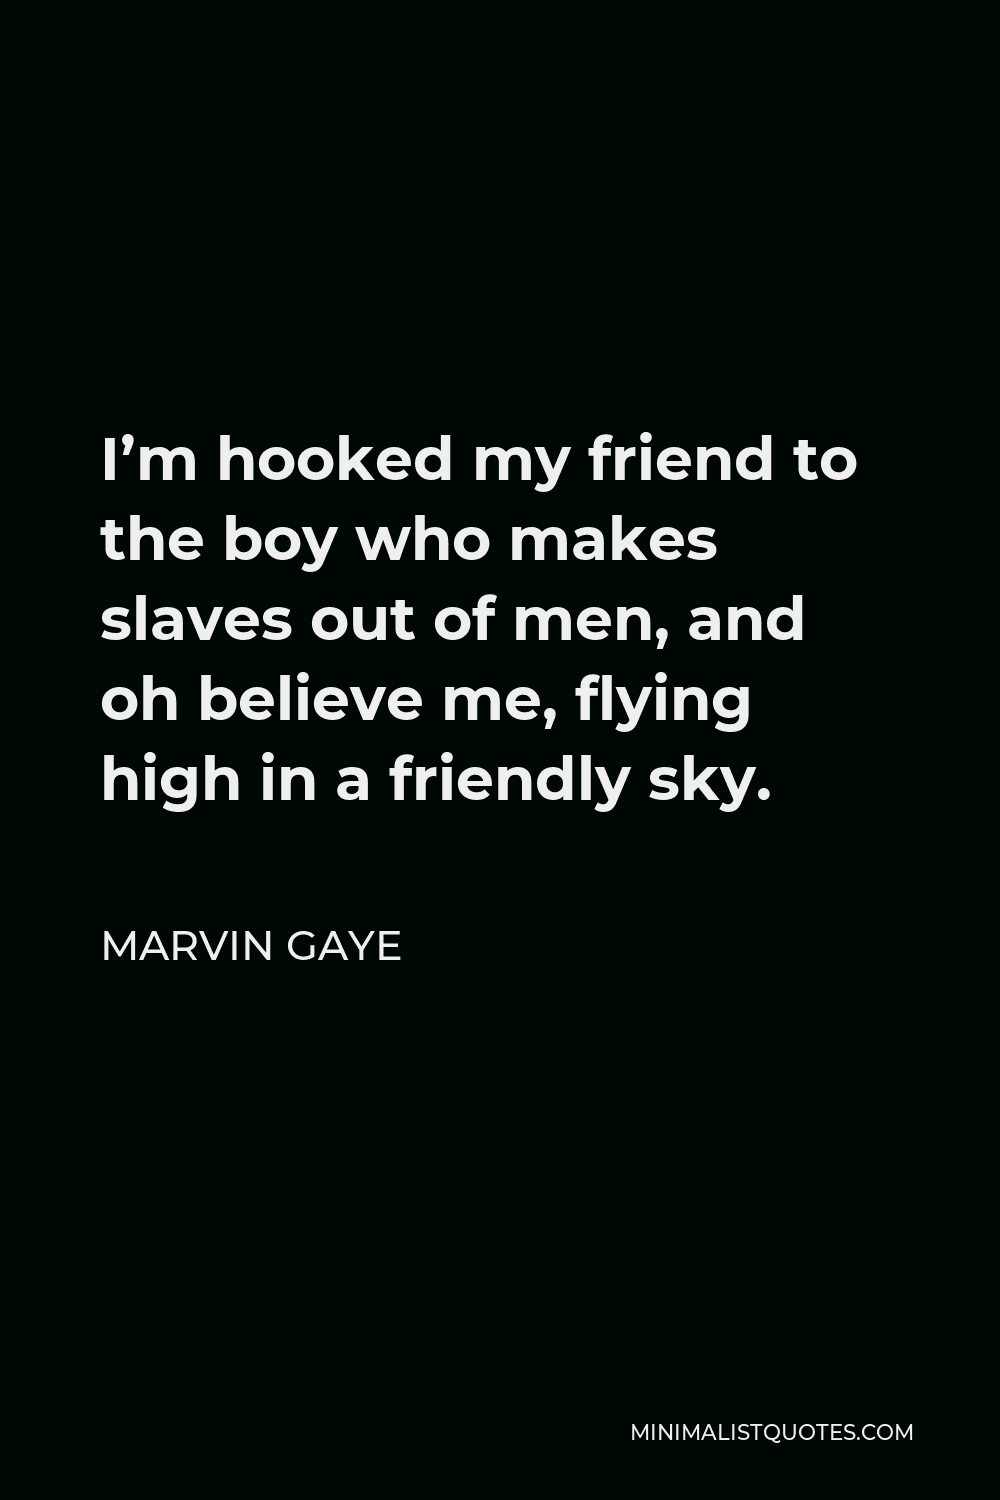 Marvin Gaye Quote - I’m hooked my friend to the boy who makes slaves out of men, and oh believe me, flying high in a friendly sky.